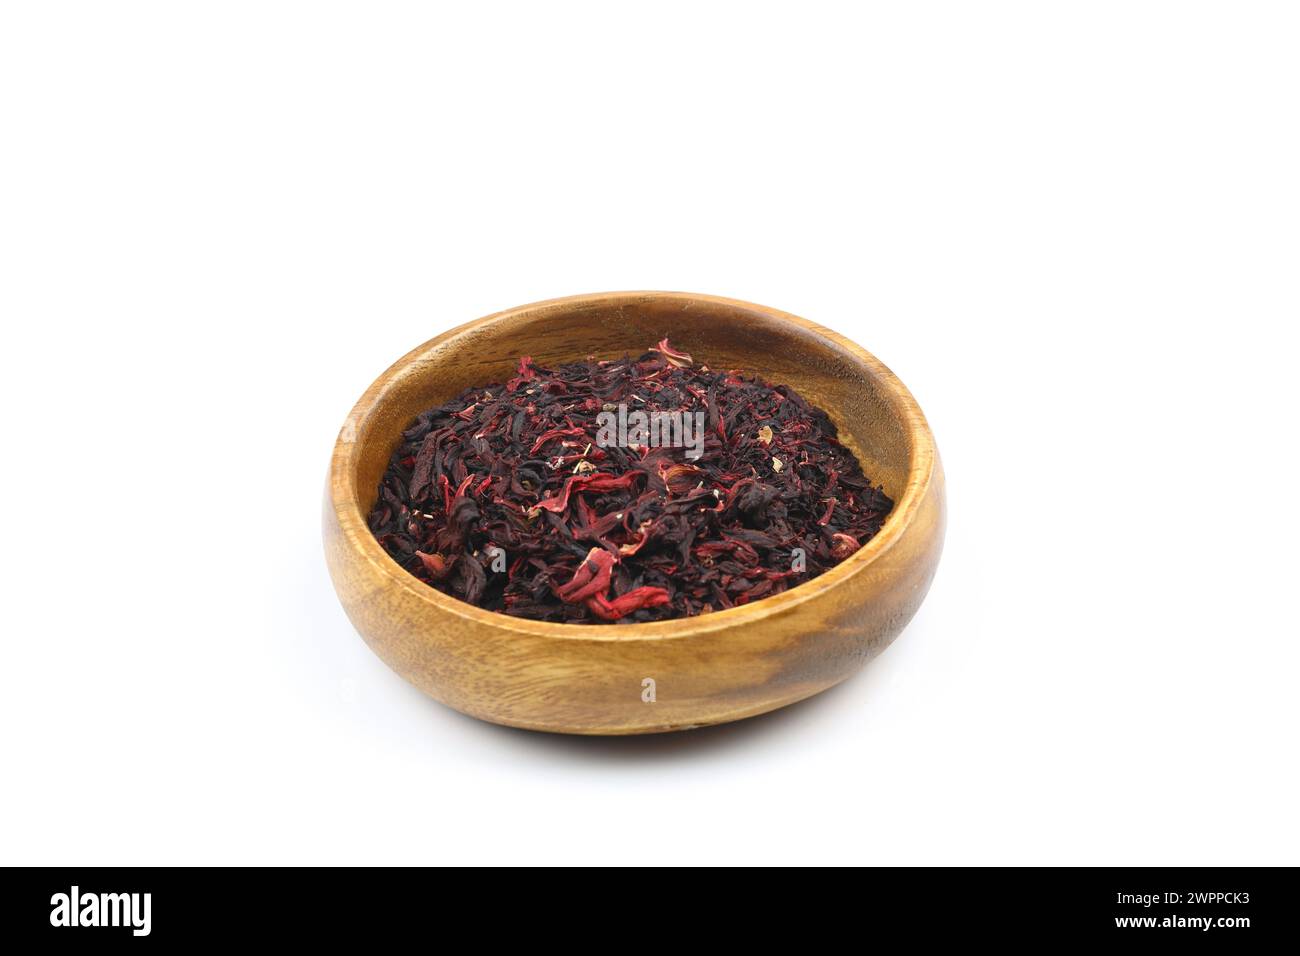 Karkade tea. Hibiscus tea leaves in wooden bowl isolated on white background. File contains clipping path. Top view. Stock Photo